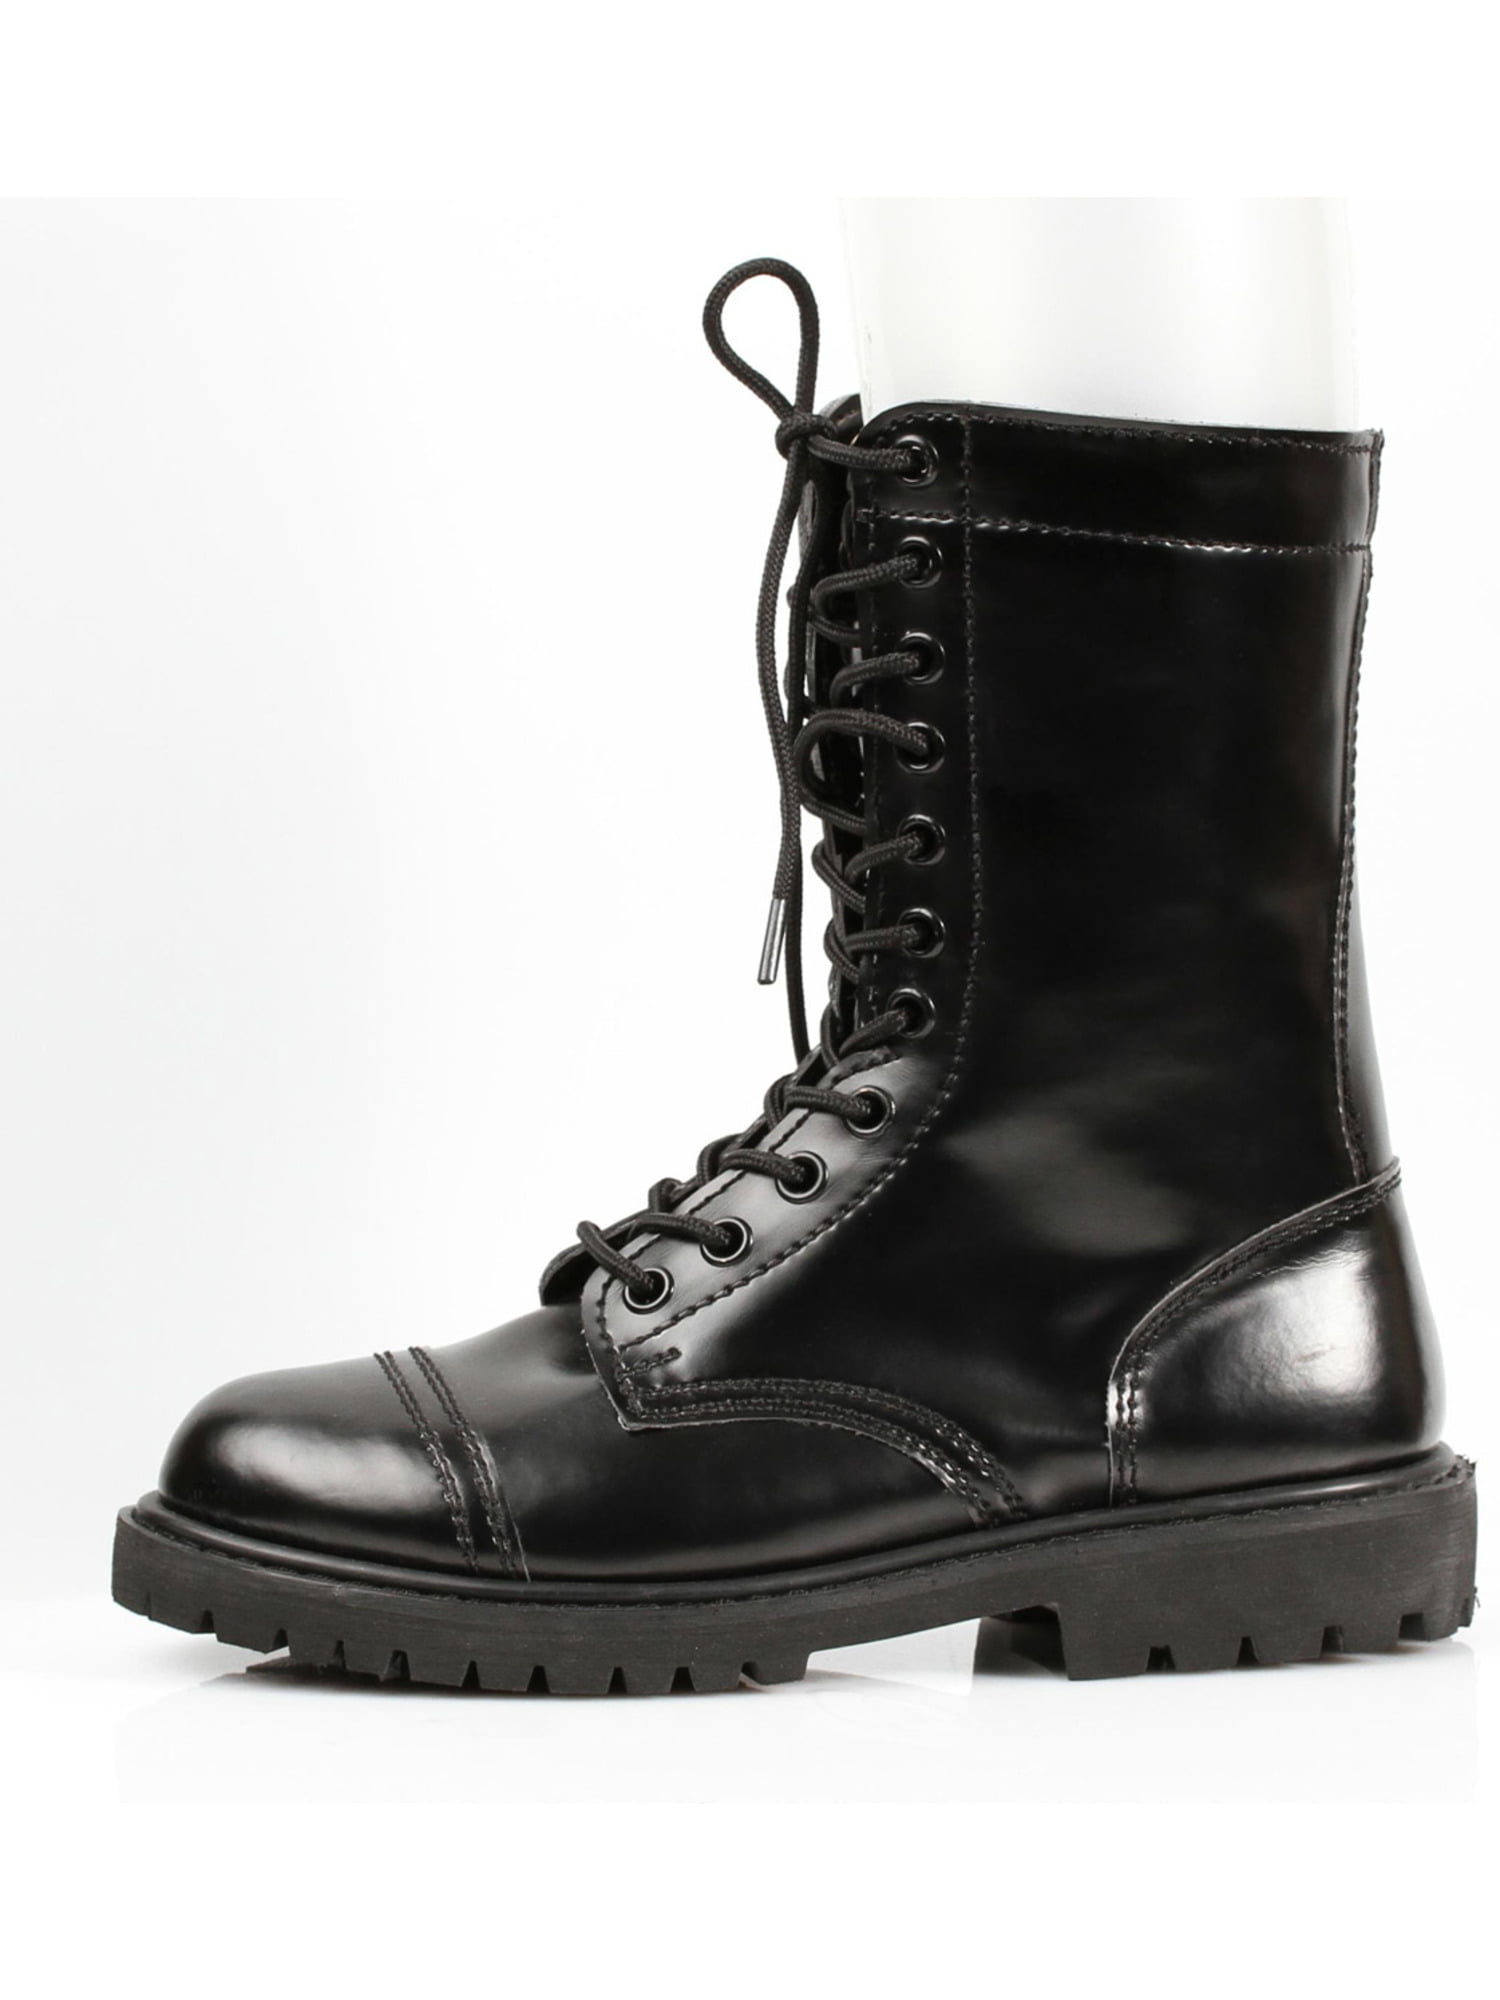 Womens Black Combat Boots Lace Up Ankle 